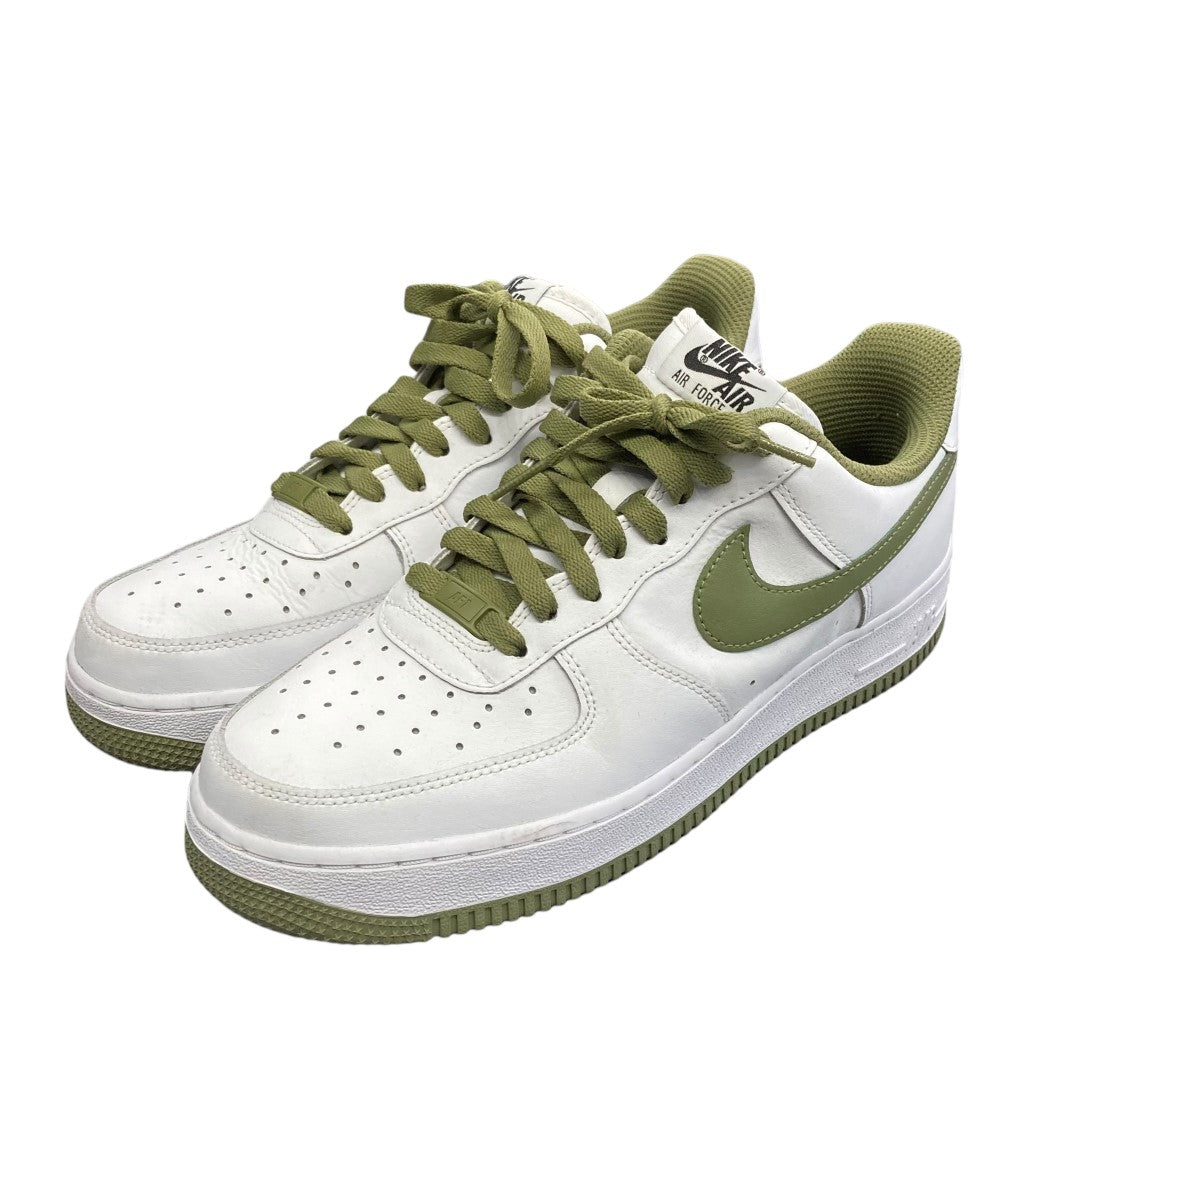 AIR FORCE 1 By YouローカットスニーカーCT7875-994